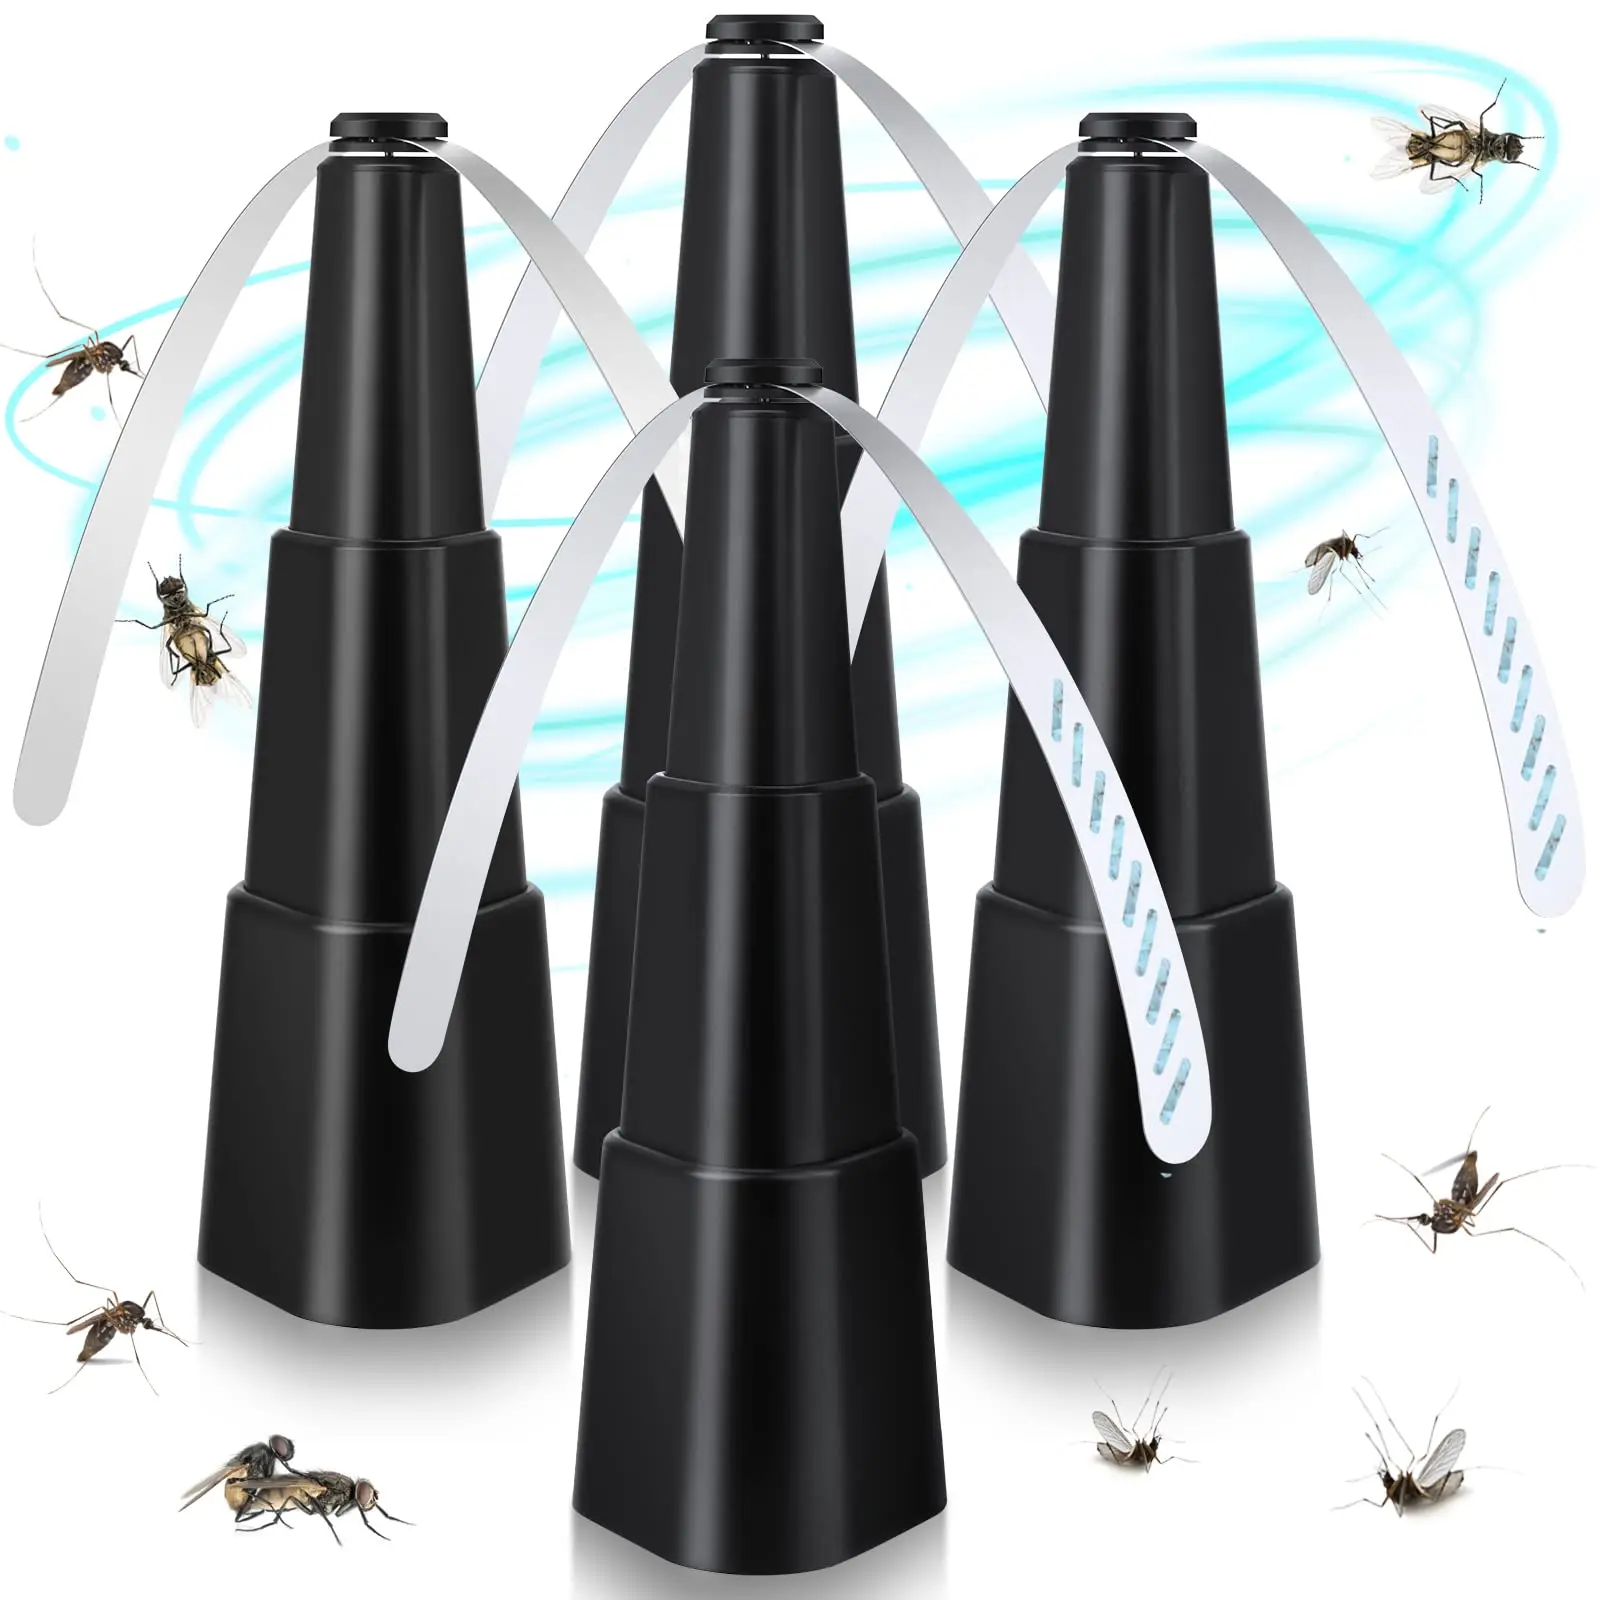 silent fan for automatic flycatcher fly repellent mute fly repellent fan kitchen keep flies and bugs away from your food Fly Fans for Tables Fly Repellent Fan Indoor Outdoor with Holographic Blades Keep Flies Away Bug Repellent Outdoor